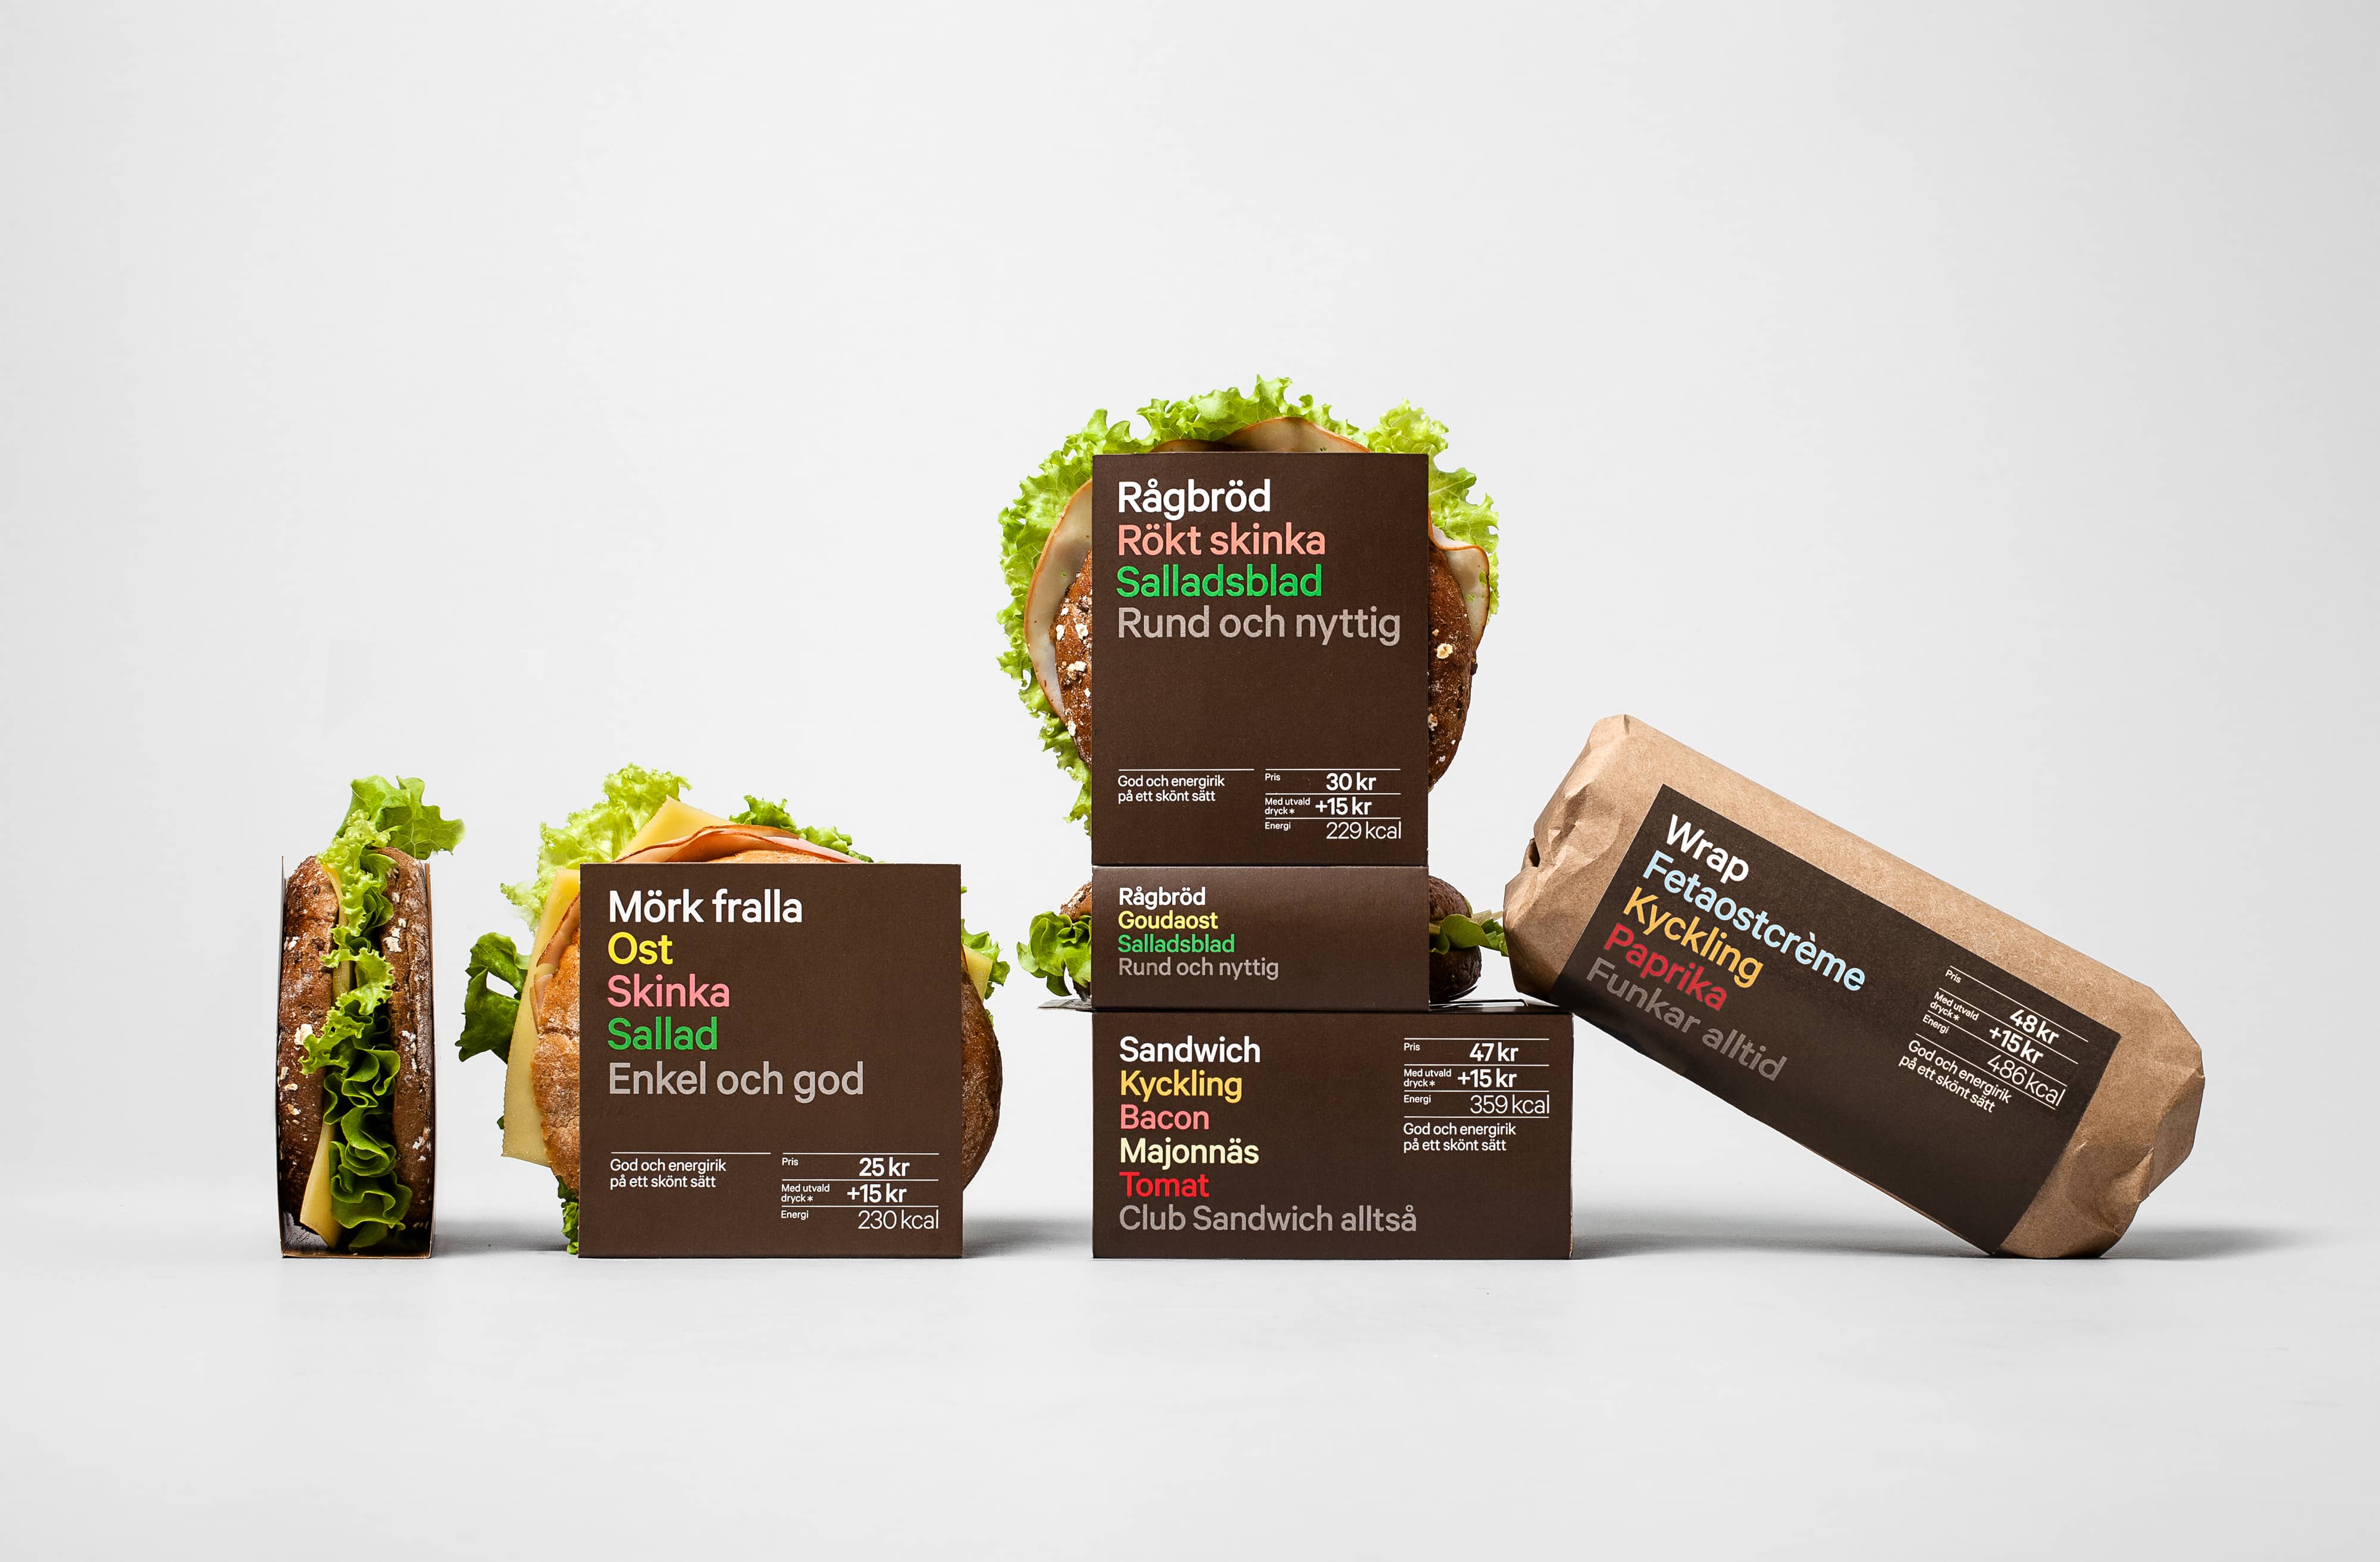 Sandwich, salad and wrap packaging designed by BVD for 7-Eleven Sweden